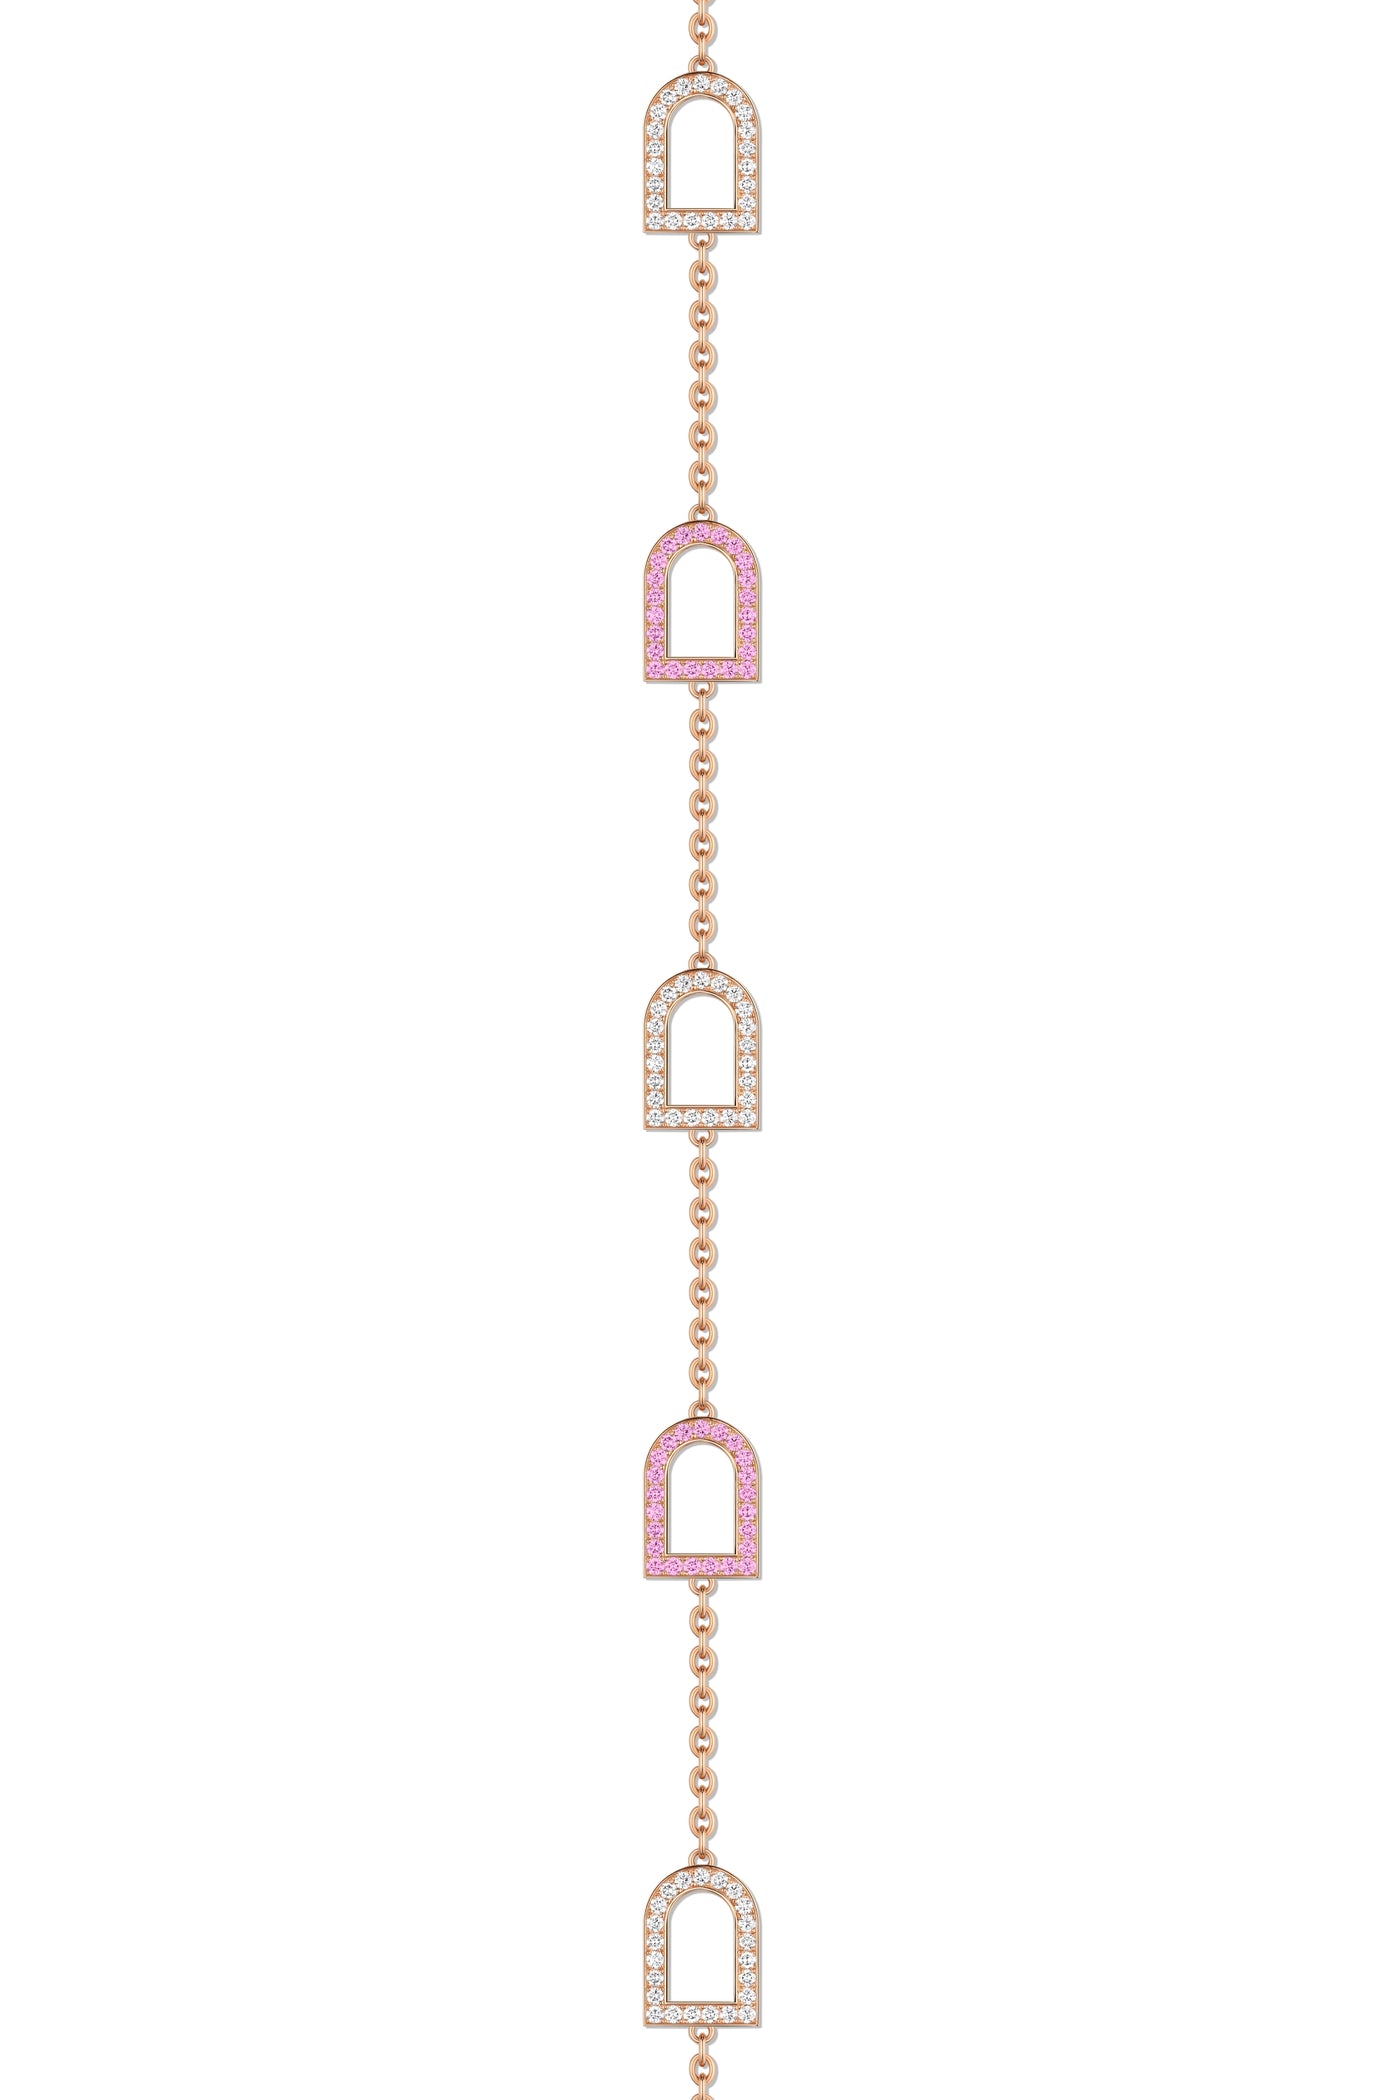 L'Arc Voyage Sautoir, 18k Rose Gold with 18 MM Arch Motifs Alternating Galerie Diamonds and Pink Sapphires - DAVIDOR